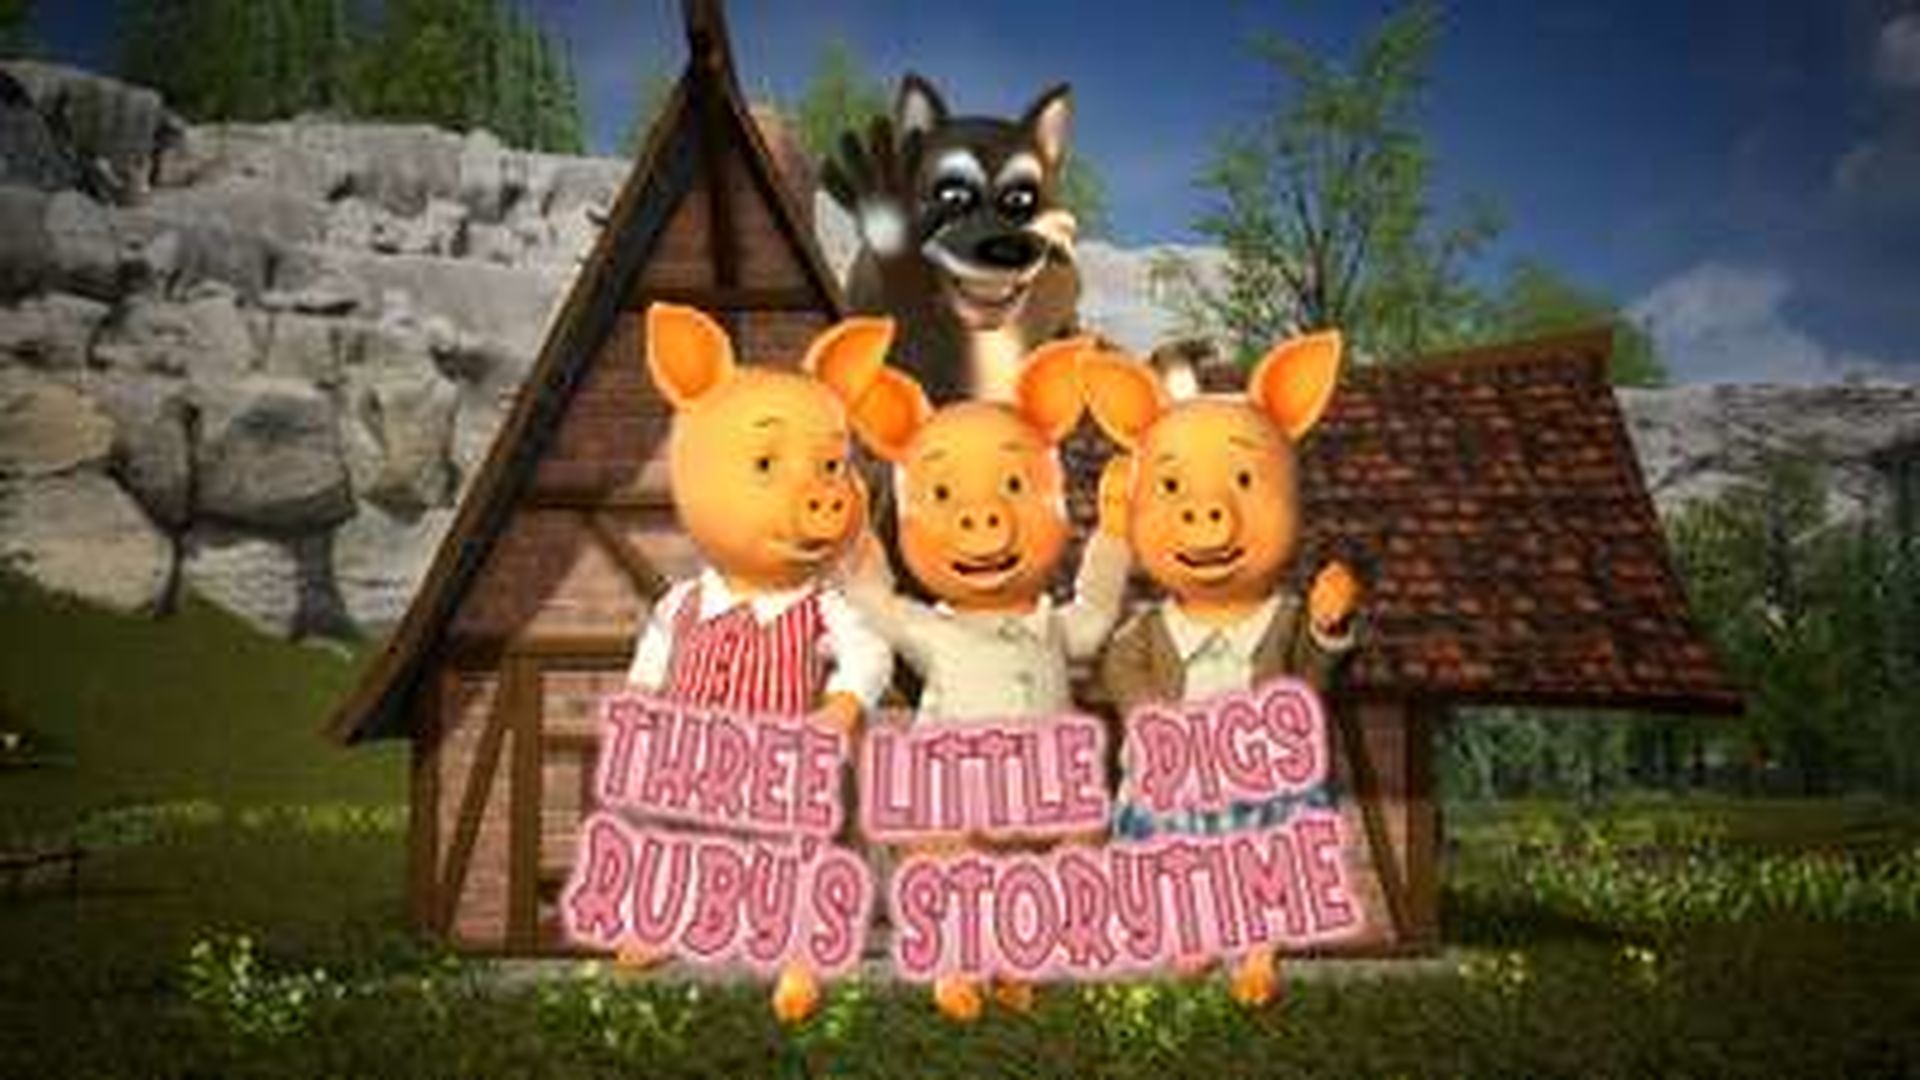 Three Little Pigs: Ruby's Storytime